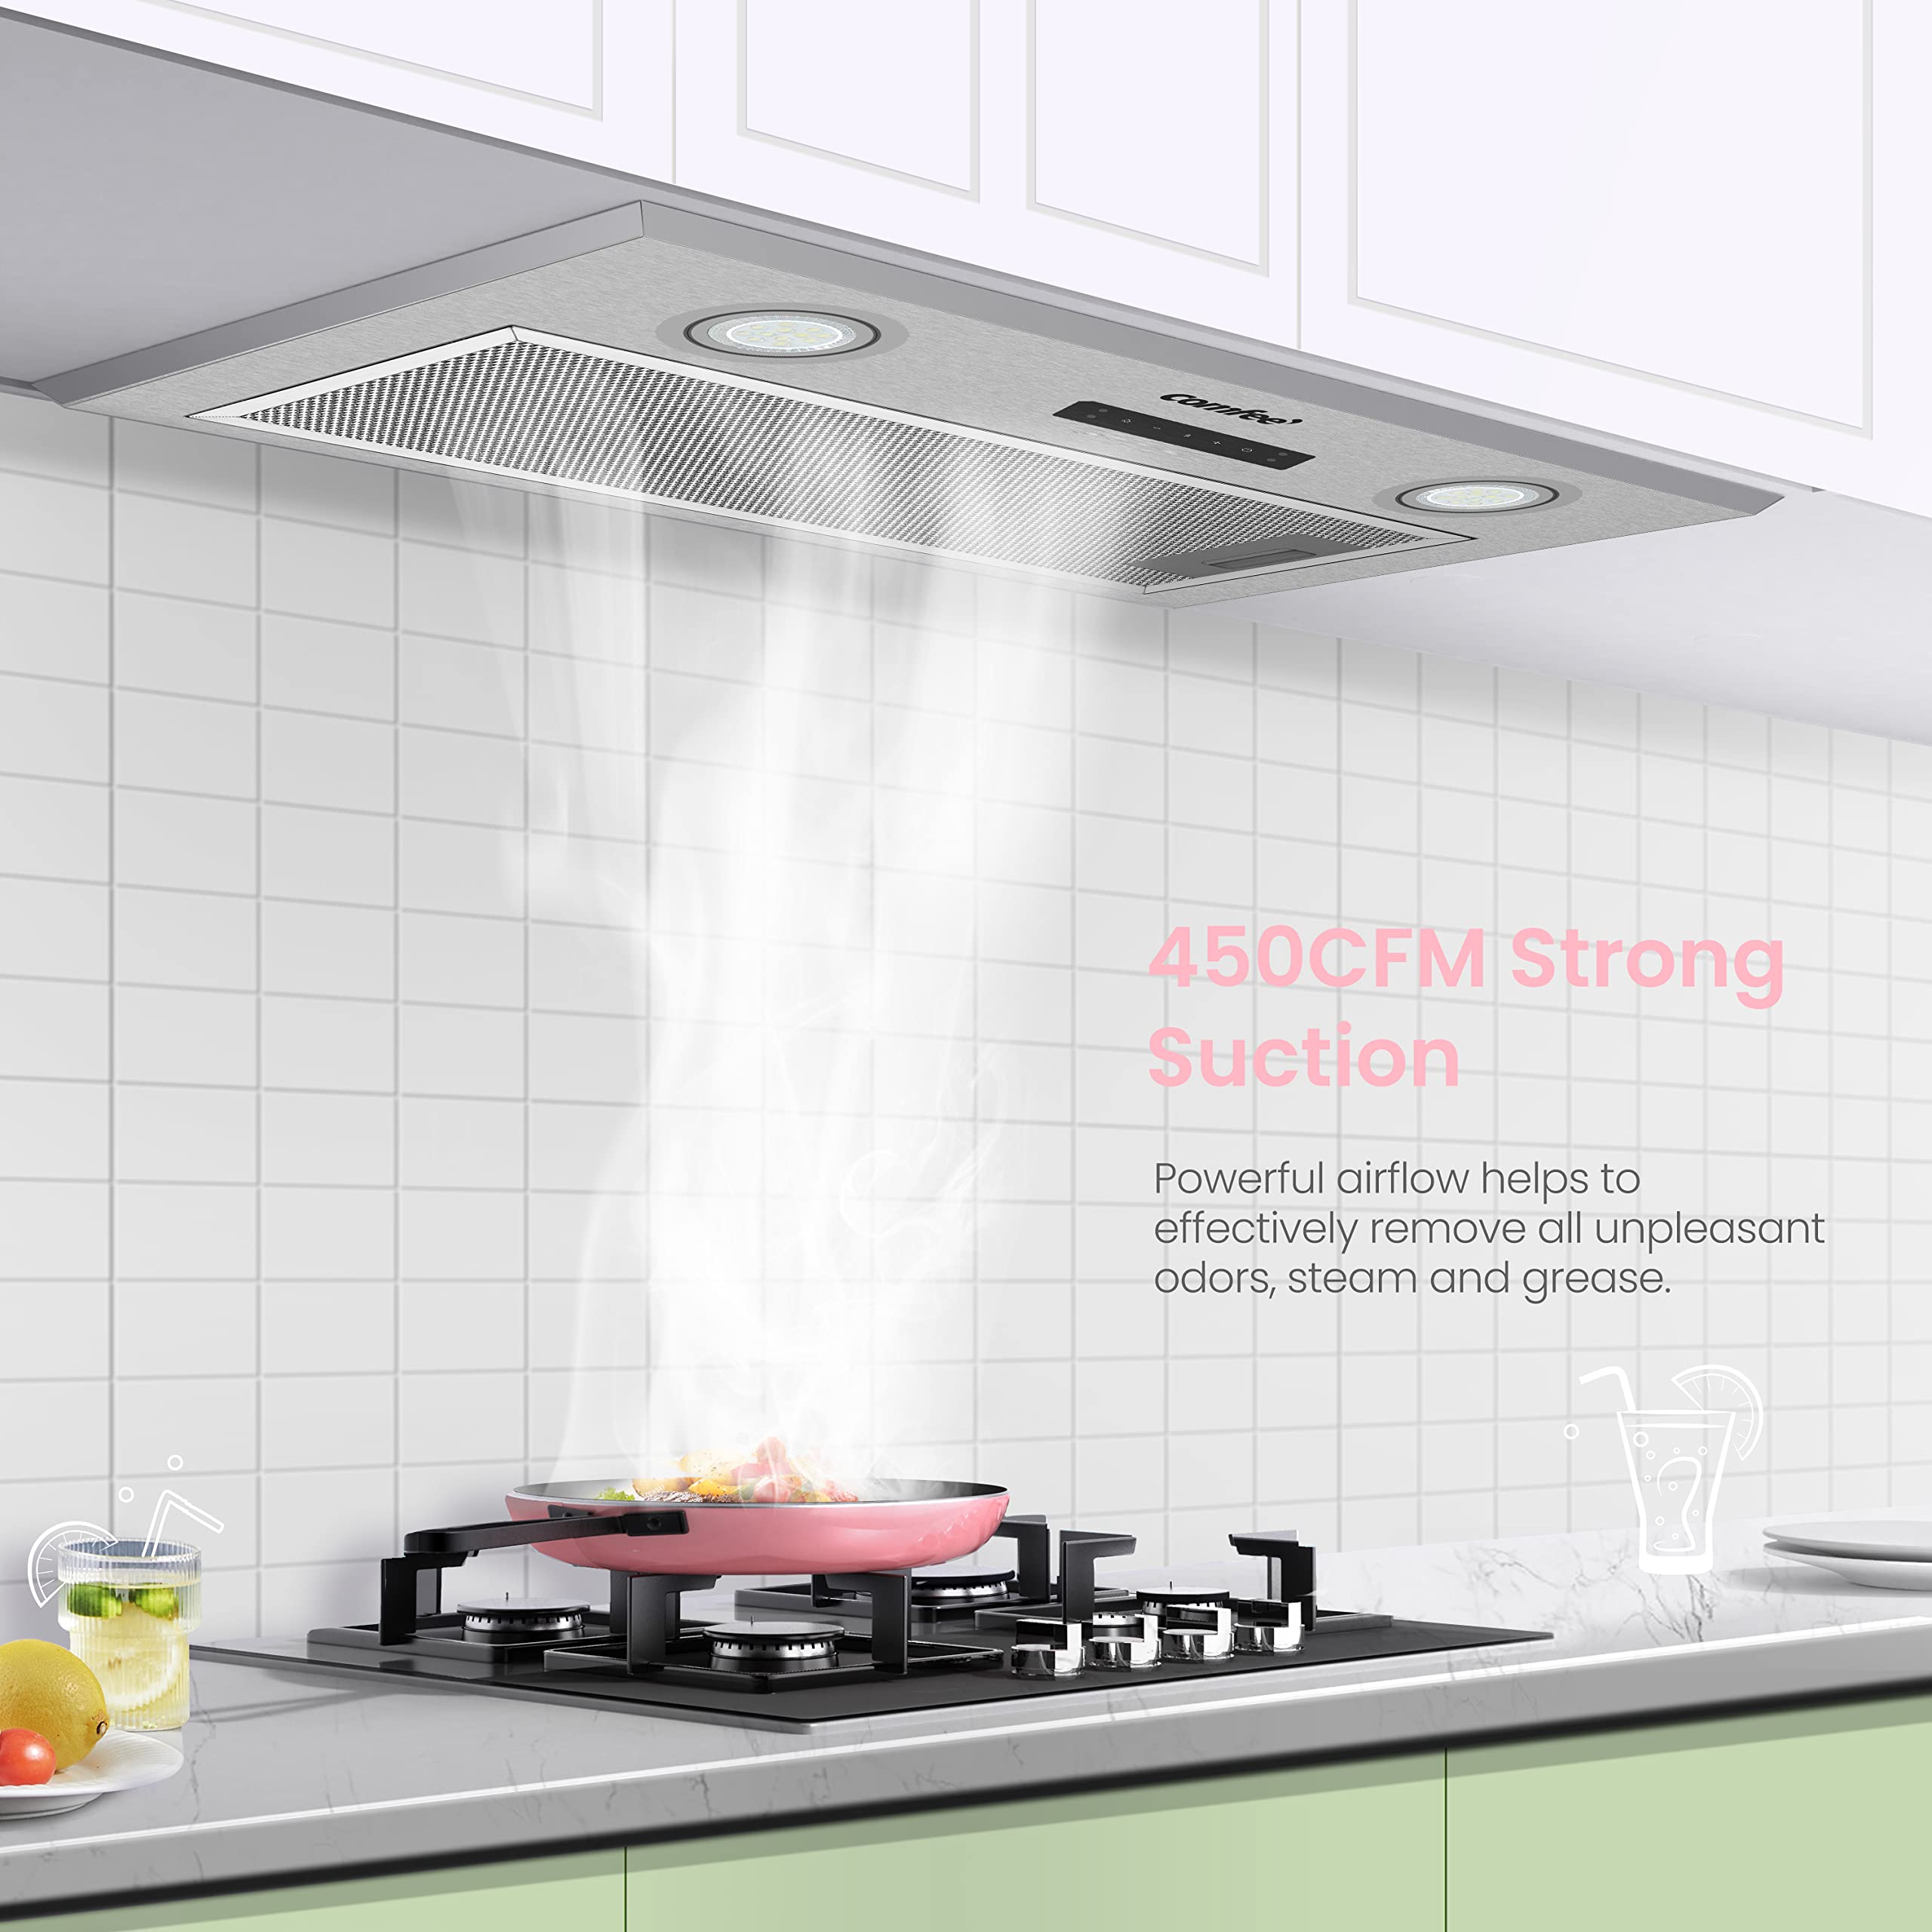 Comfee' Range Hood 27 inch, Built-in/Insert Vent Hood 450 CFM, 3 Speed Gesture Sensing & Touch Control Panel Stainless Steel Kitchen Stove Hood, Ducted/Ductless Convertible Duct